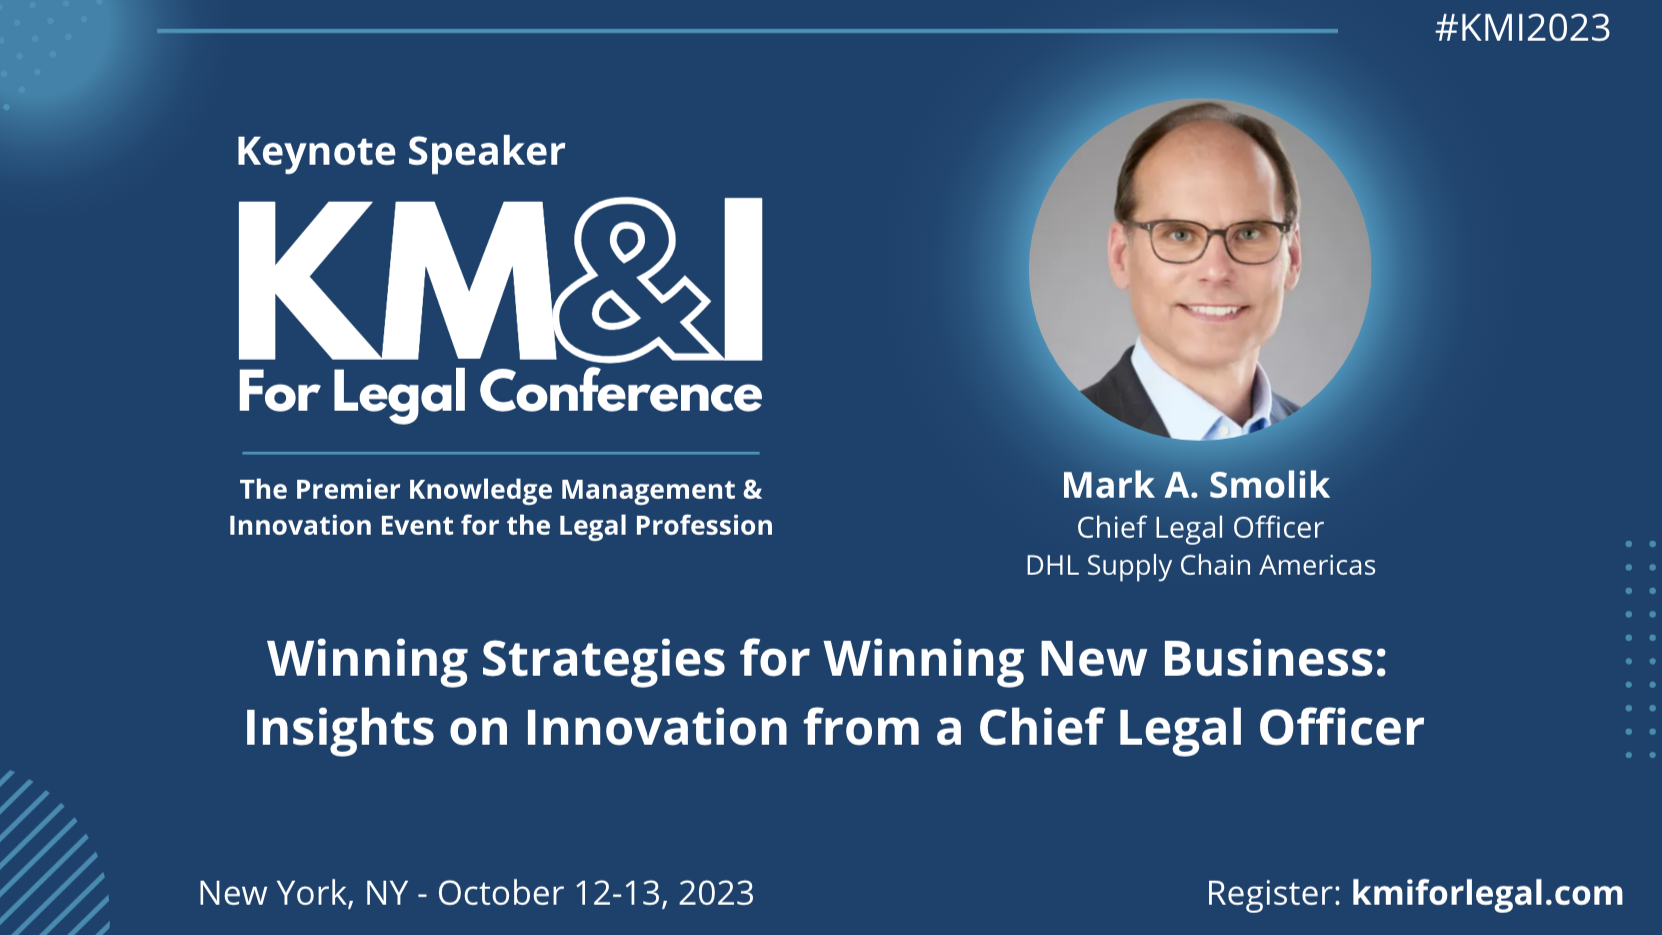 Mark Smolik, CLO at DHL, Announced As Friday Keynote Speaker at Upcoming KM &#038; Innovation for Legal Conference Oct. 12-13 in NYC